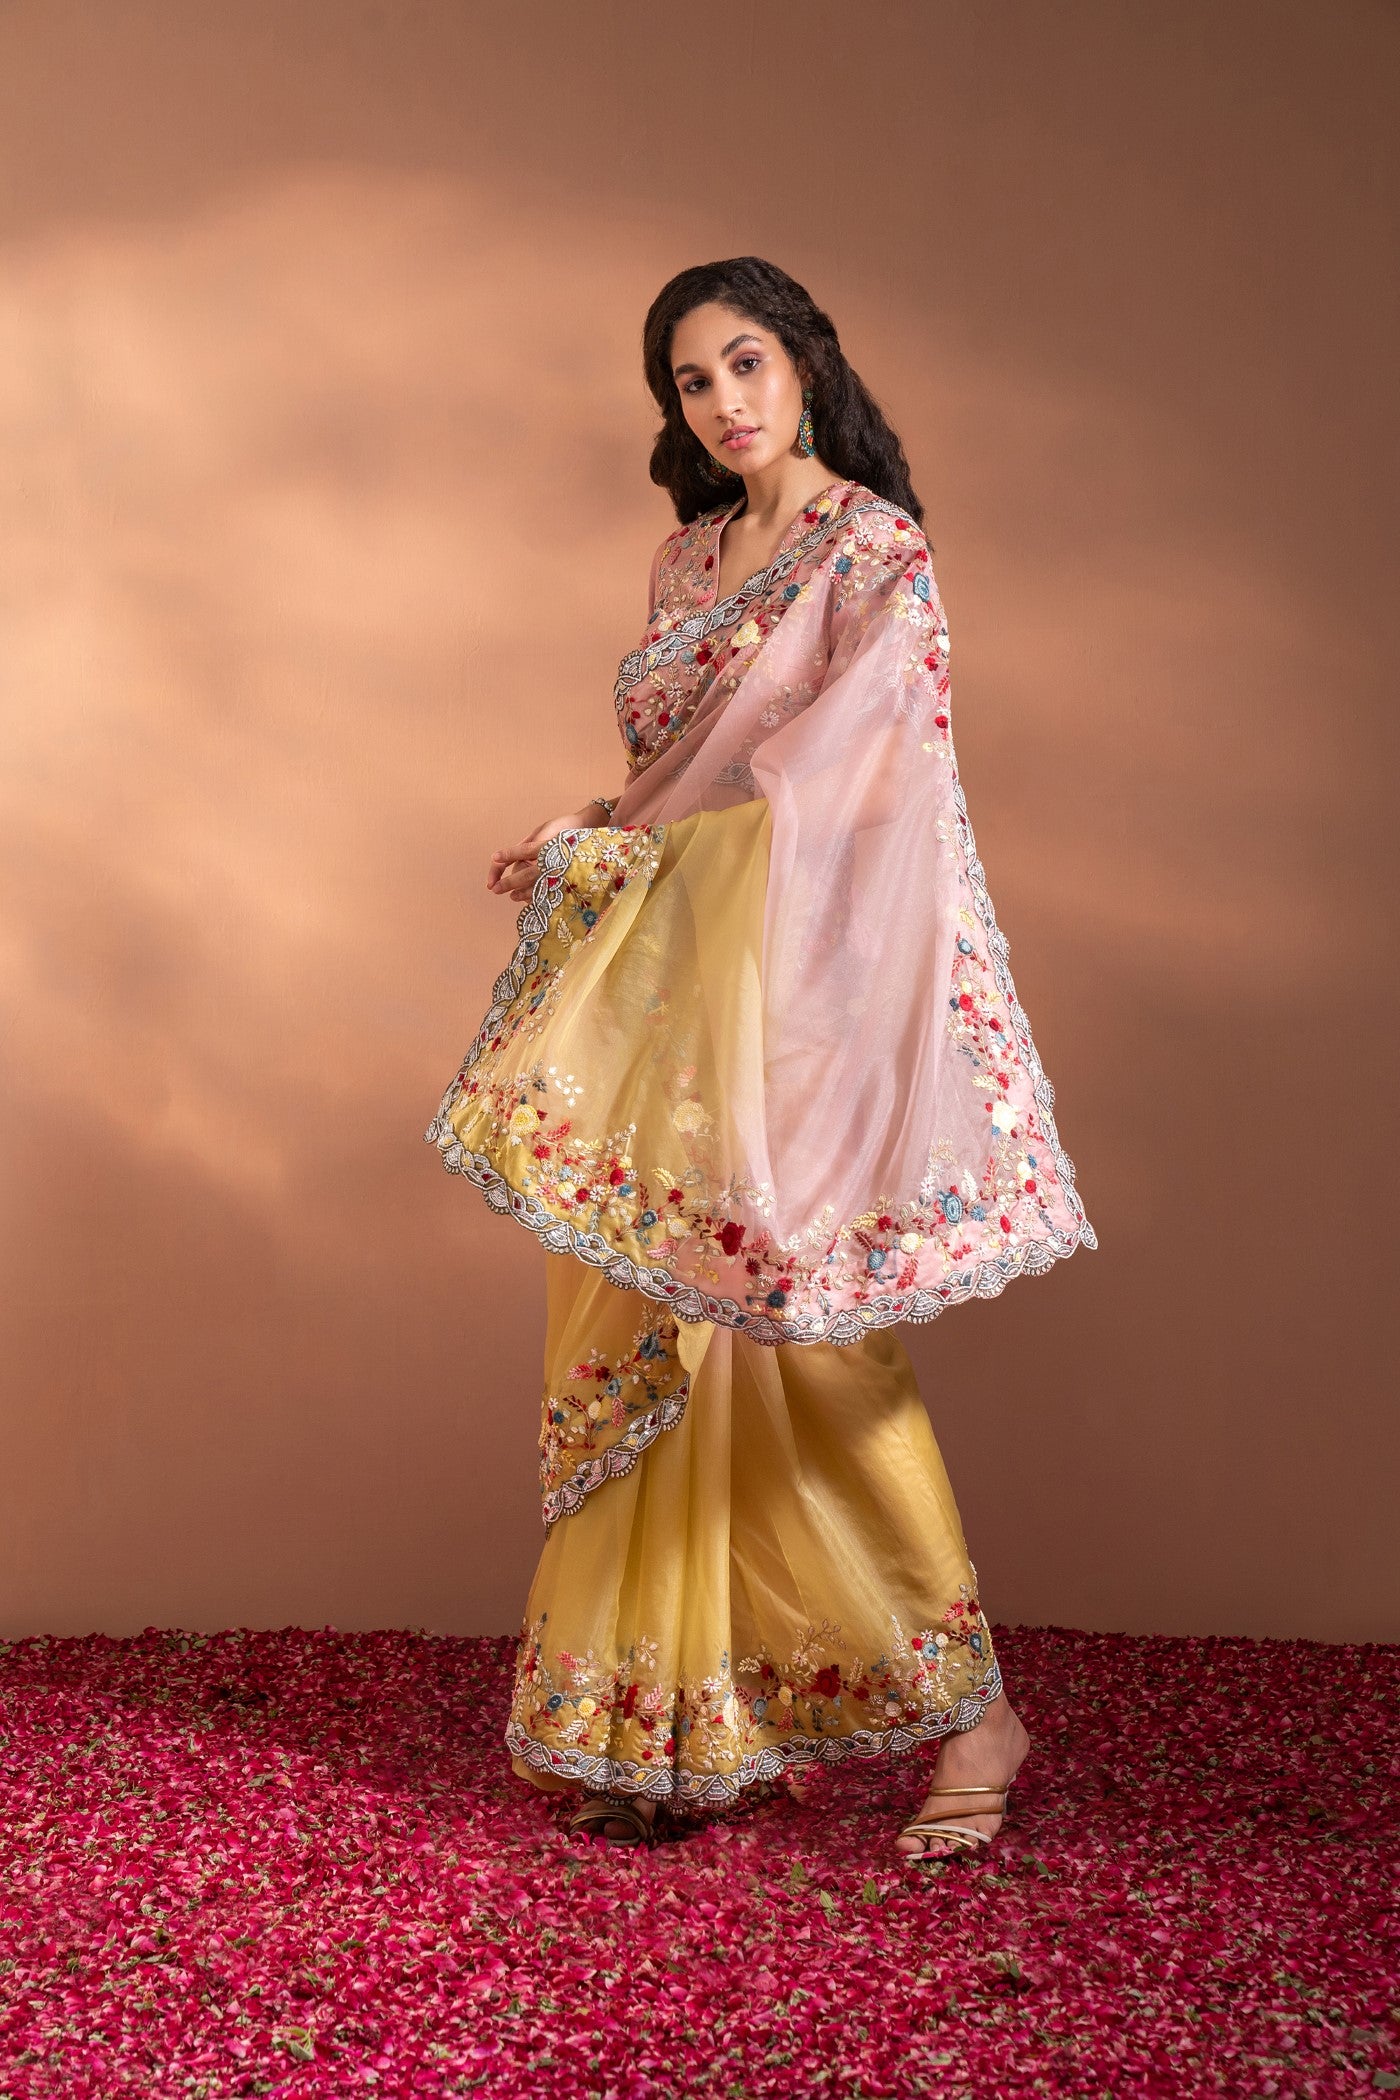 The Saree In Organza With Sequence, Moti & Threadwork in a Pastel Gradience Shade